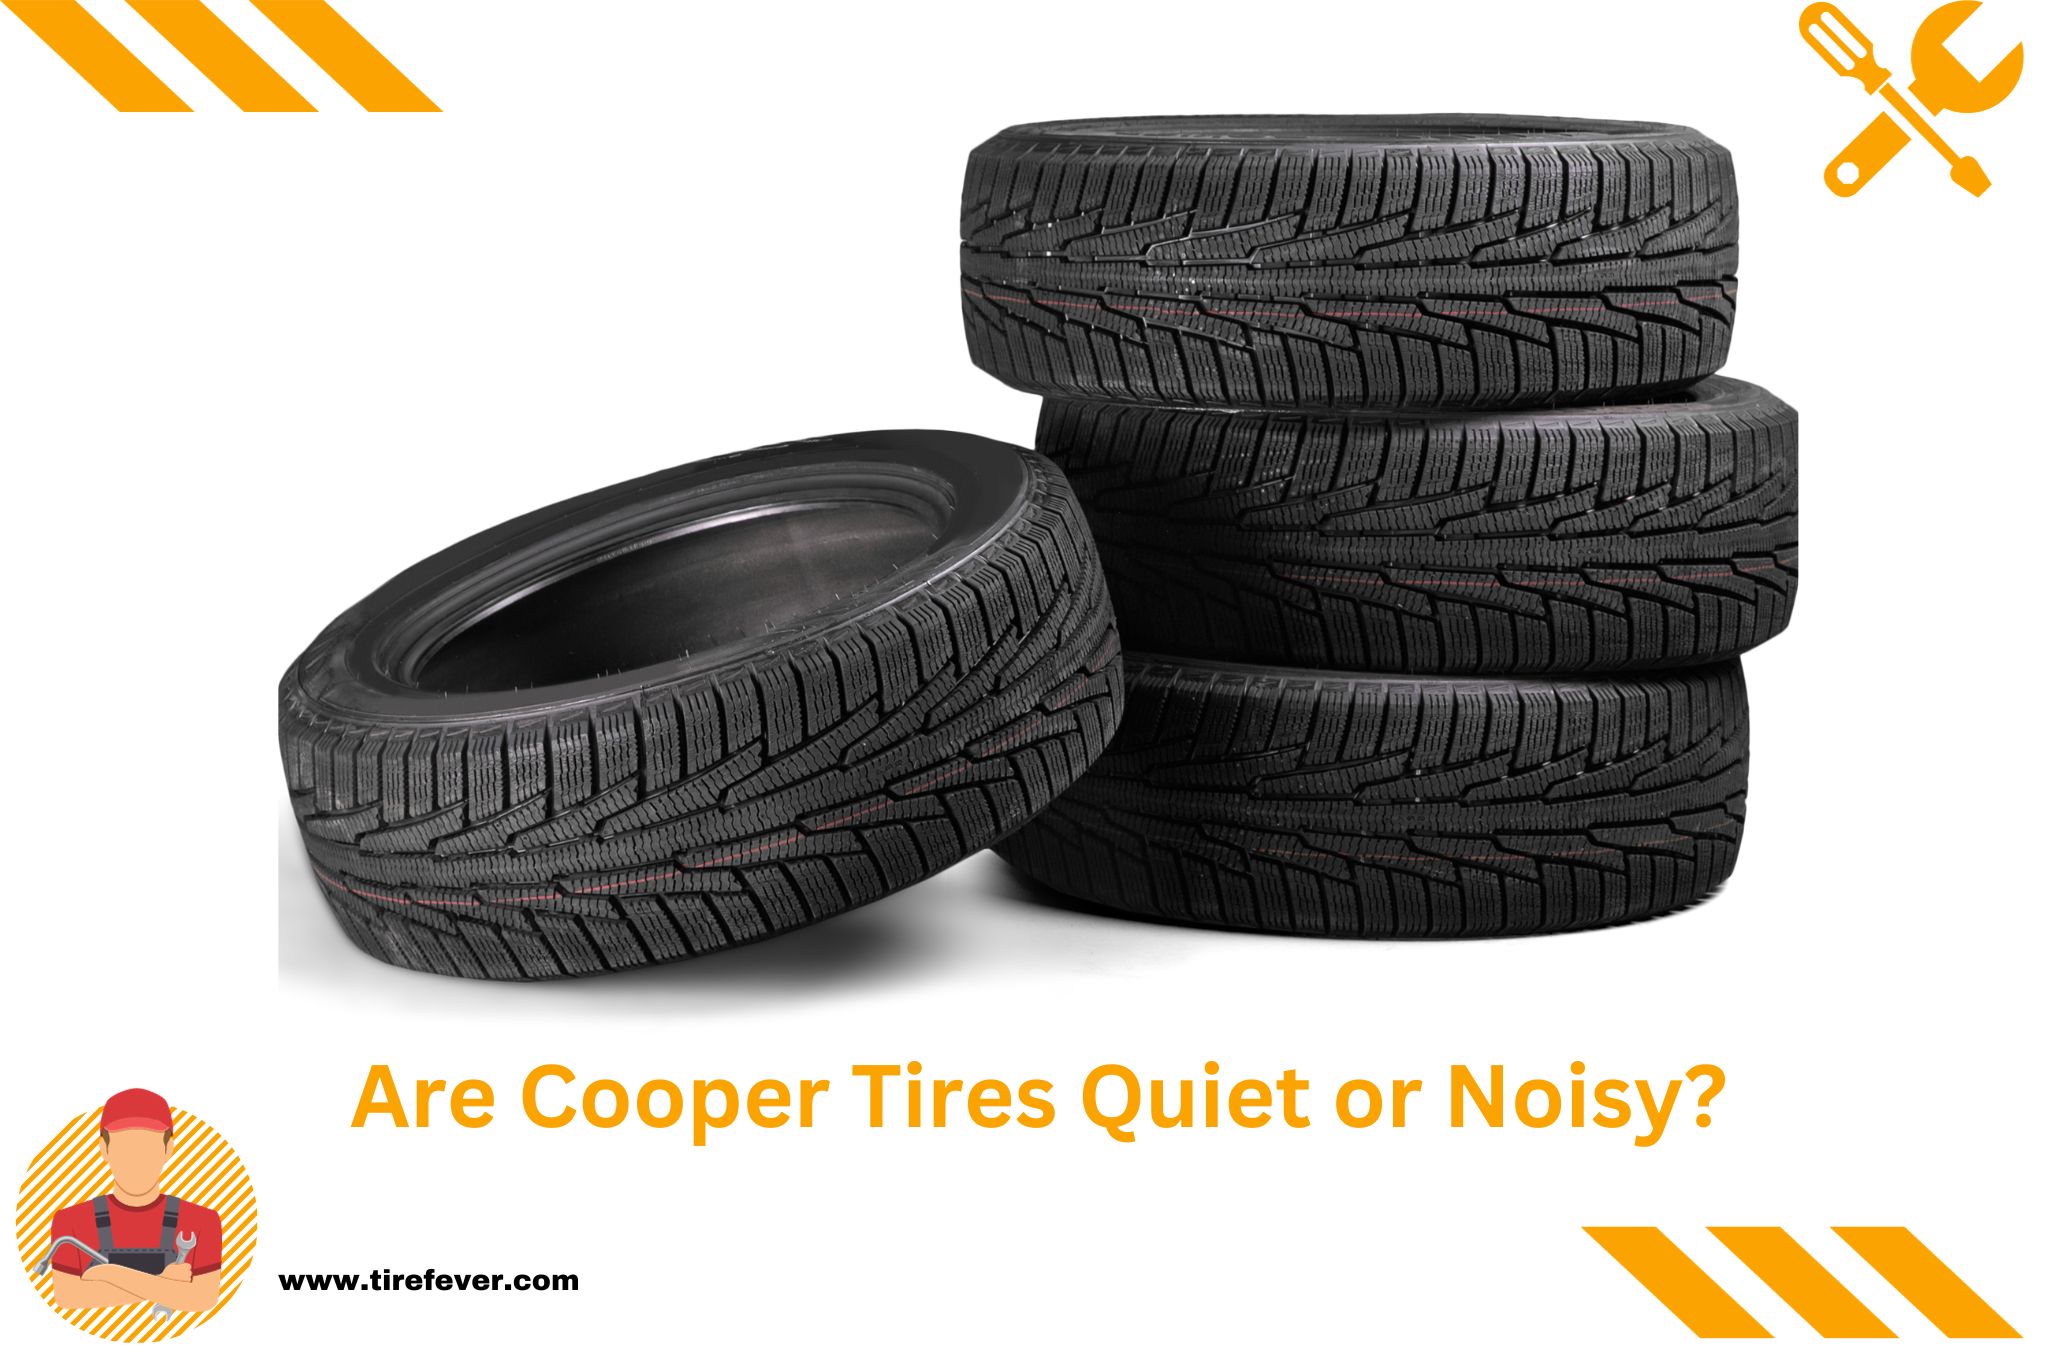 Are Cooper Tires Quiet or Noisy?